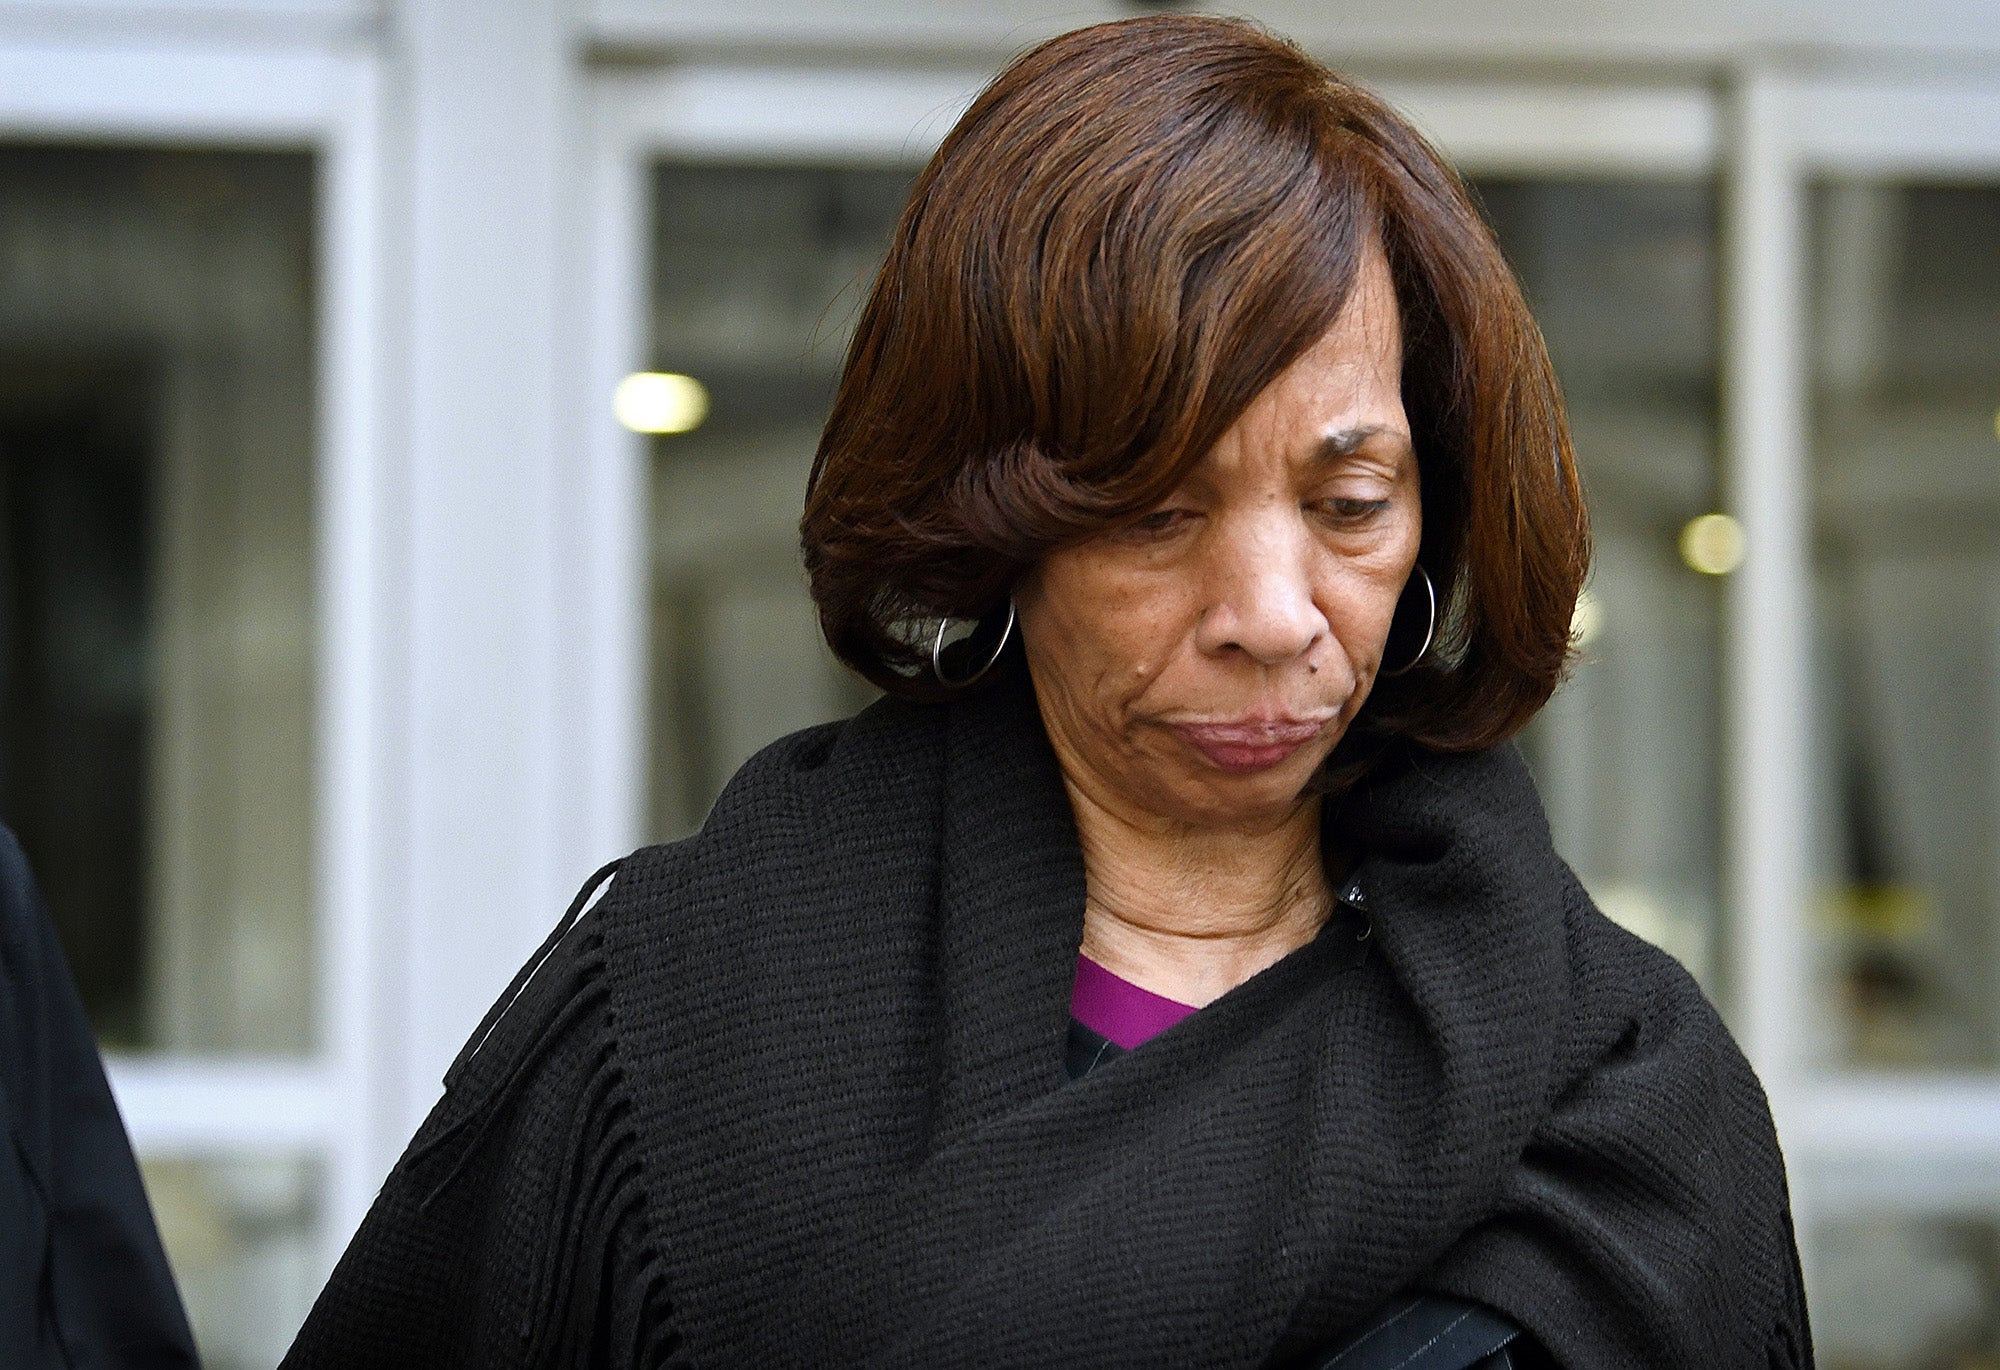 Former Baltimore Mayor Catherine Pugh Pleads Guilty To Tax Evasion, Wire Fraud